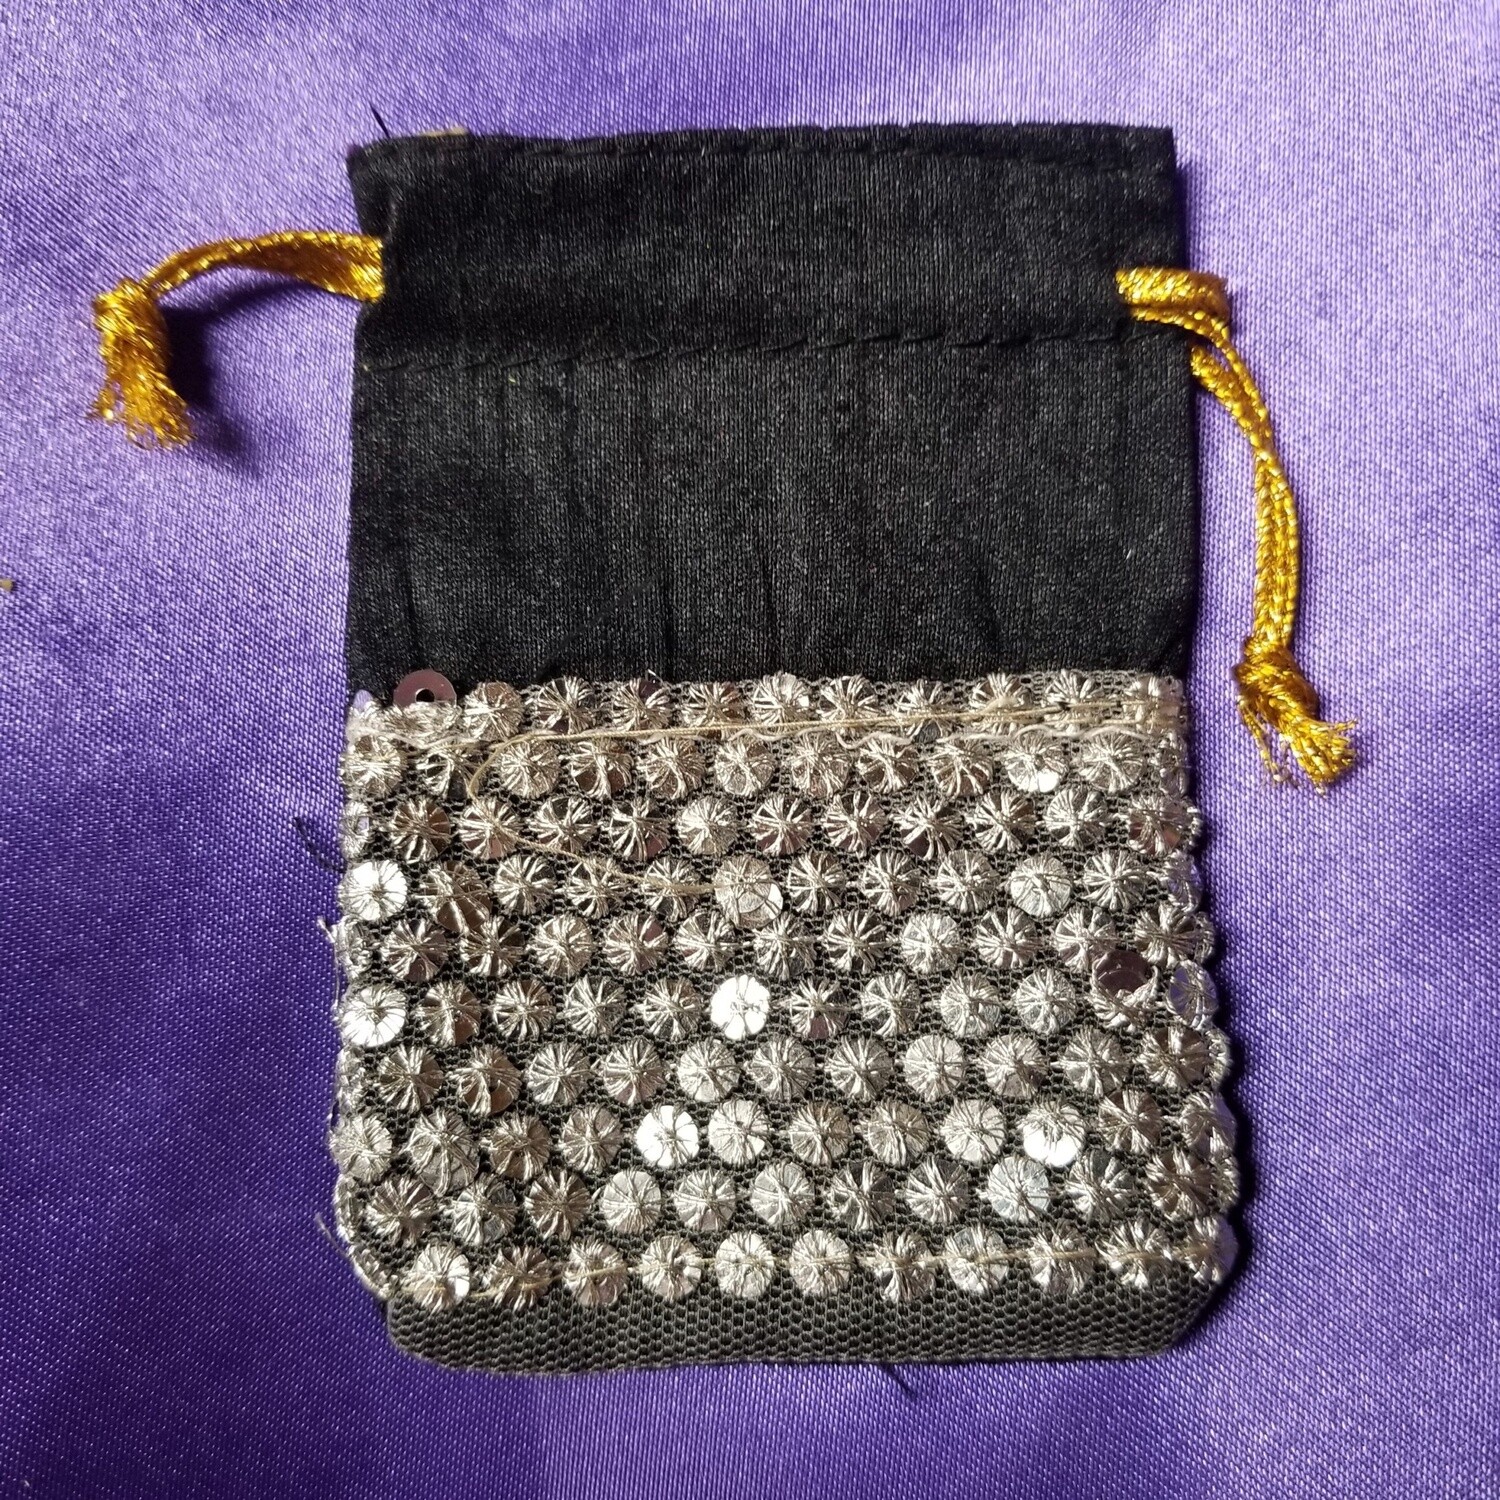 More Sequined Pouches, Color: Black